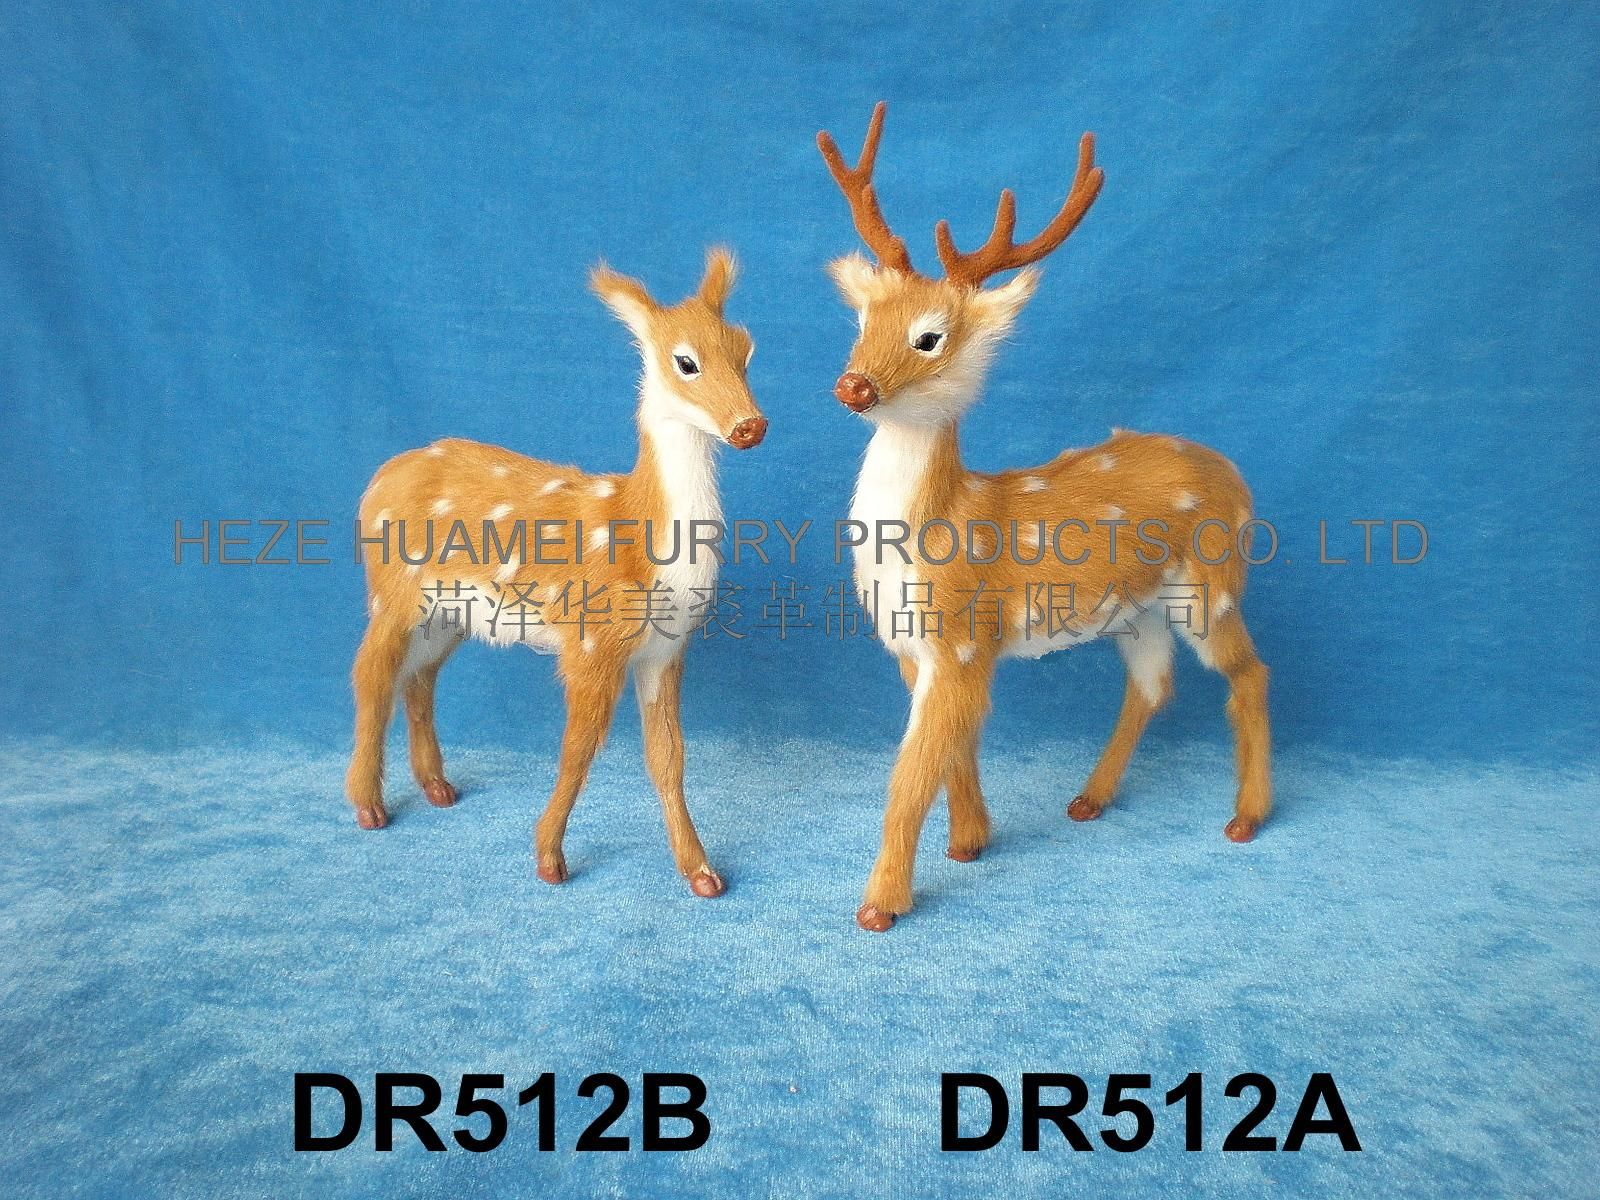 DR512,HEZE YUHANG FURRY PRODUCTS CO., LTD.